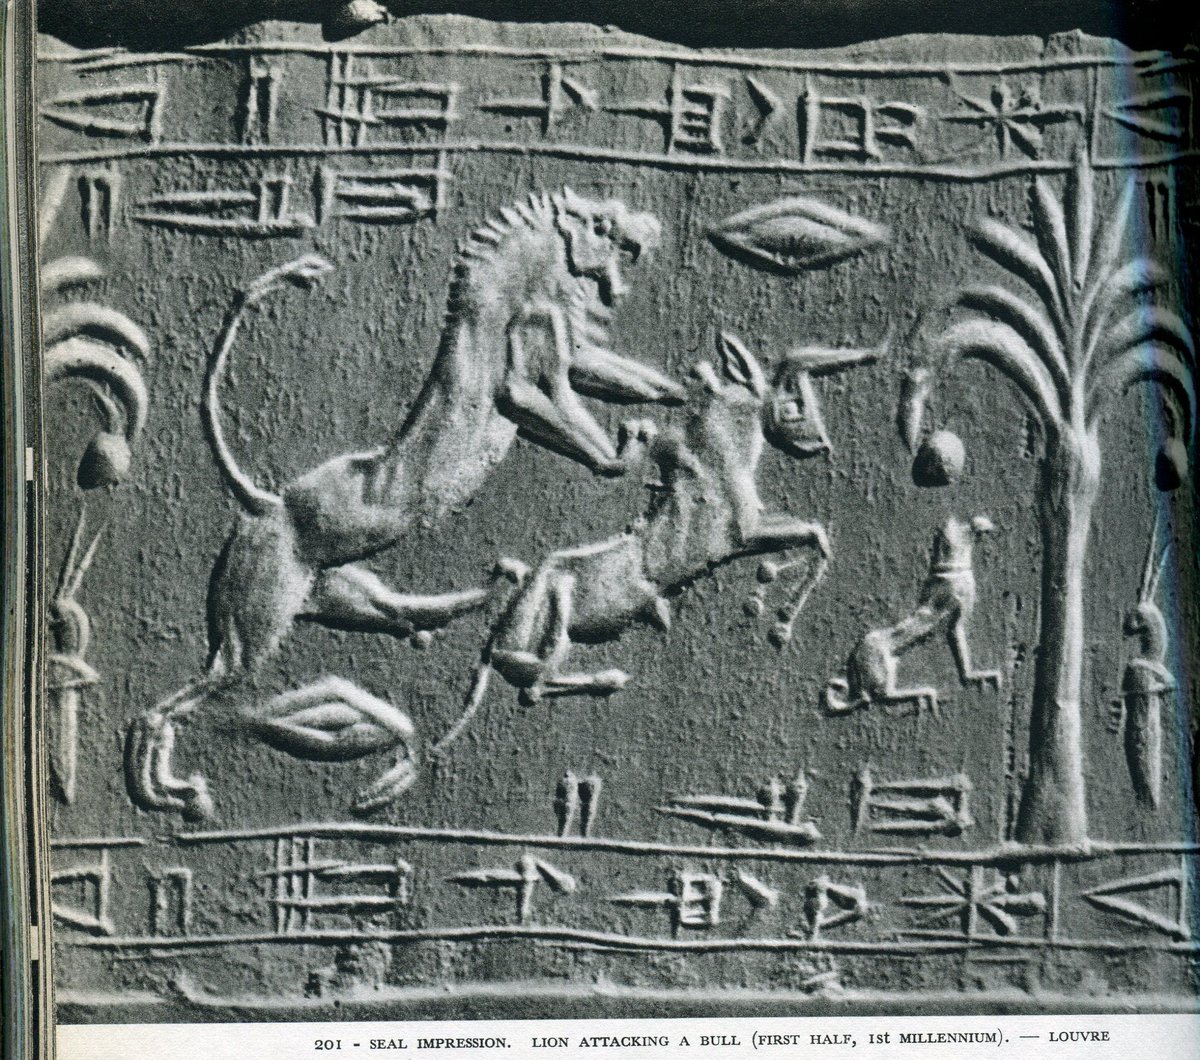 Thread: Here's an interesting cylinder seal impression, about which I only know that it is from the first half of the first millennium BC and that it is currently in Louvre. I presume that it is from Mesopotamia (cuneiform)...